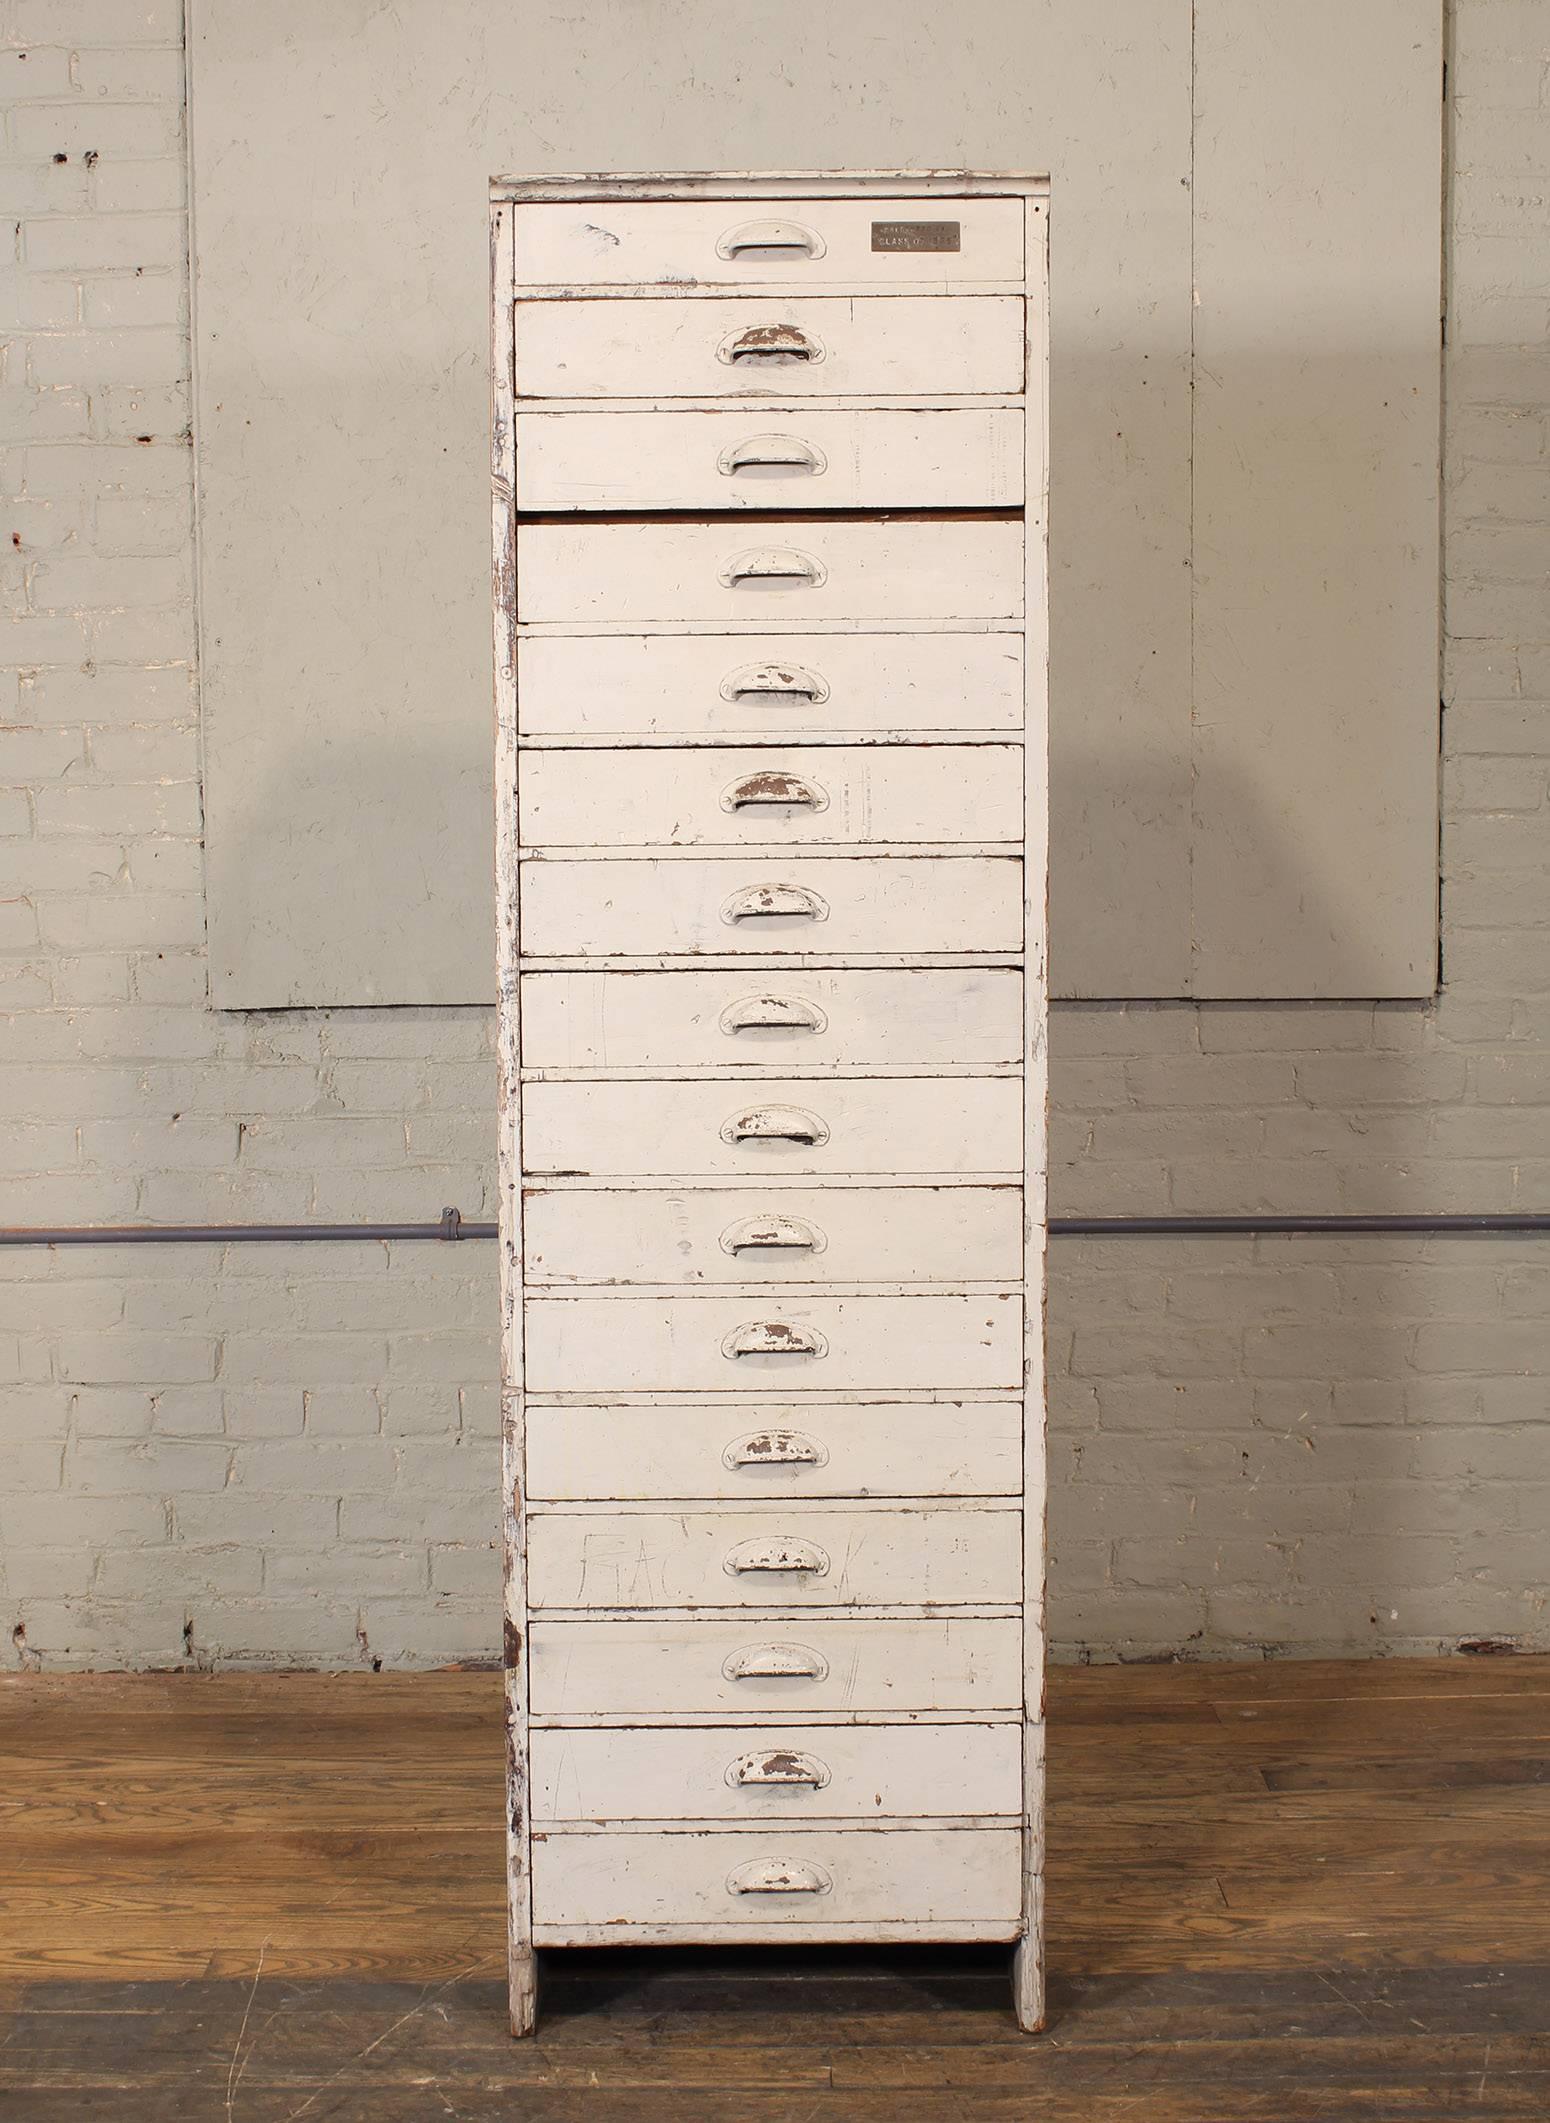 Antique upright wooden storage cabinet / chest of drawers. Inside drawer dimensions measure 16 1/2